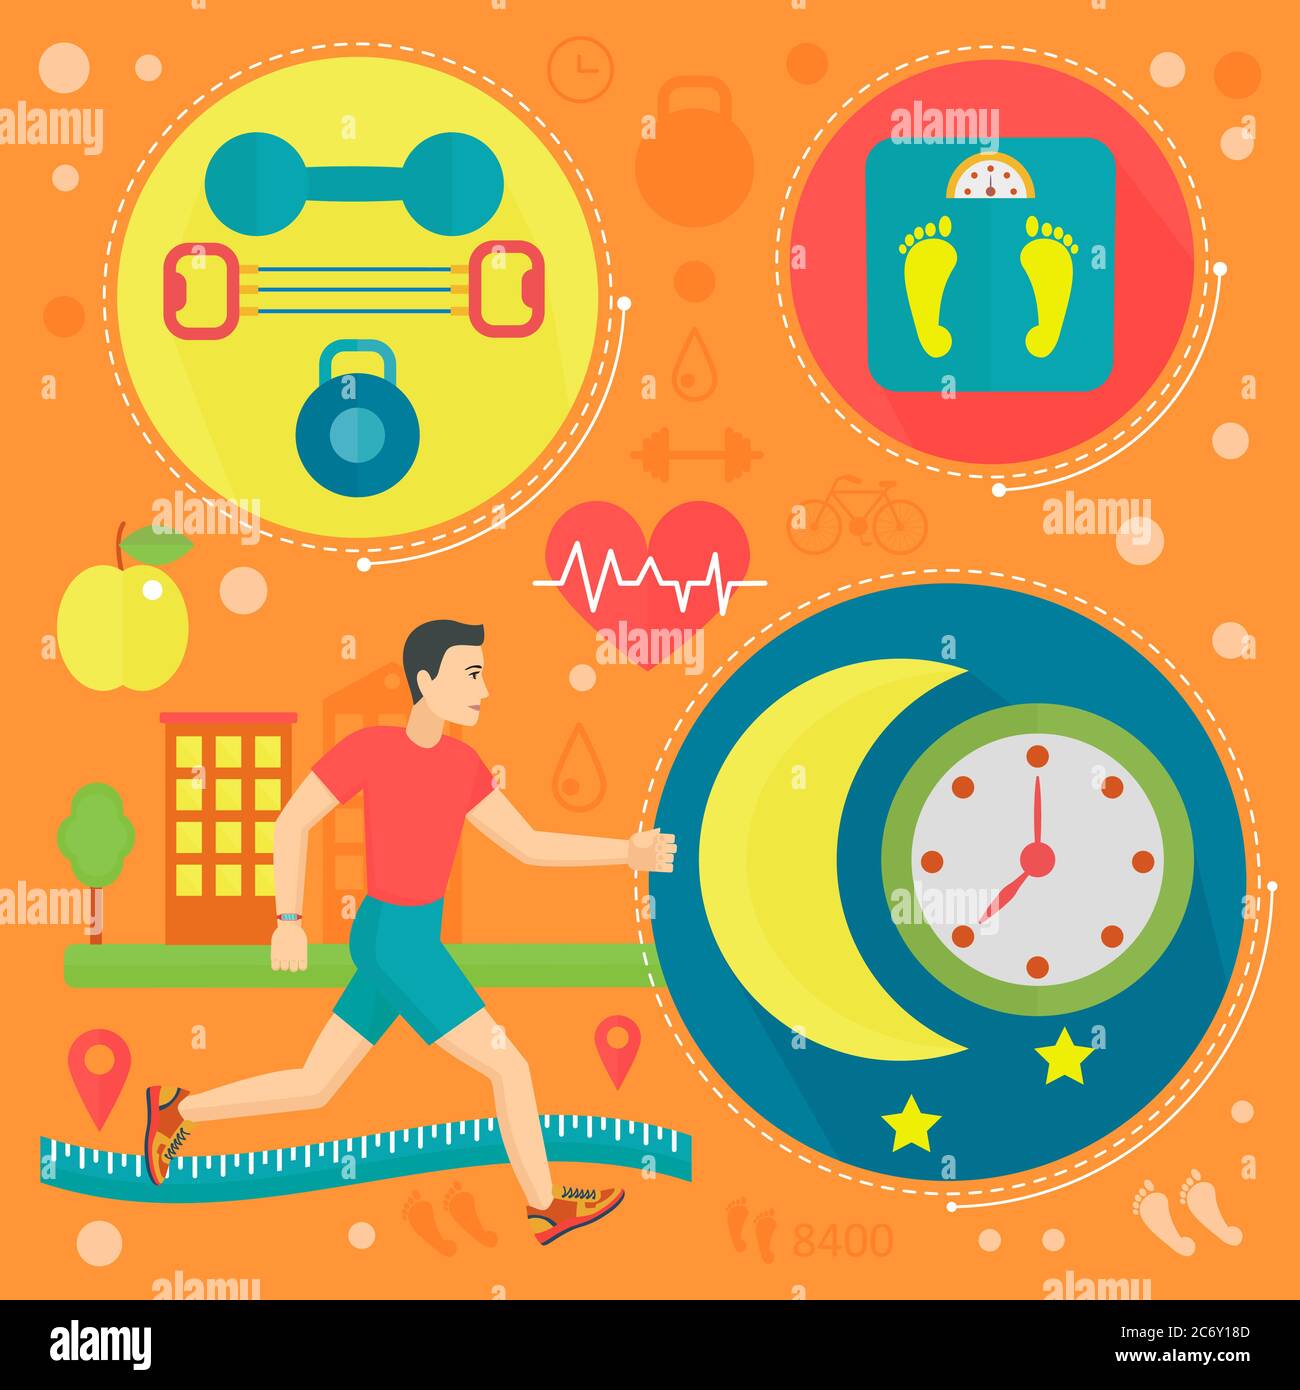 Sport aerobics healthy lifestyle concept group Vector Image